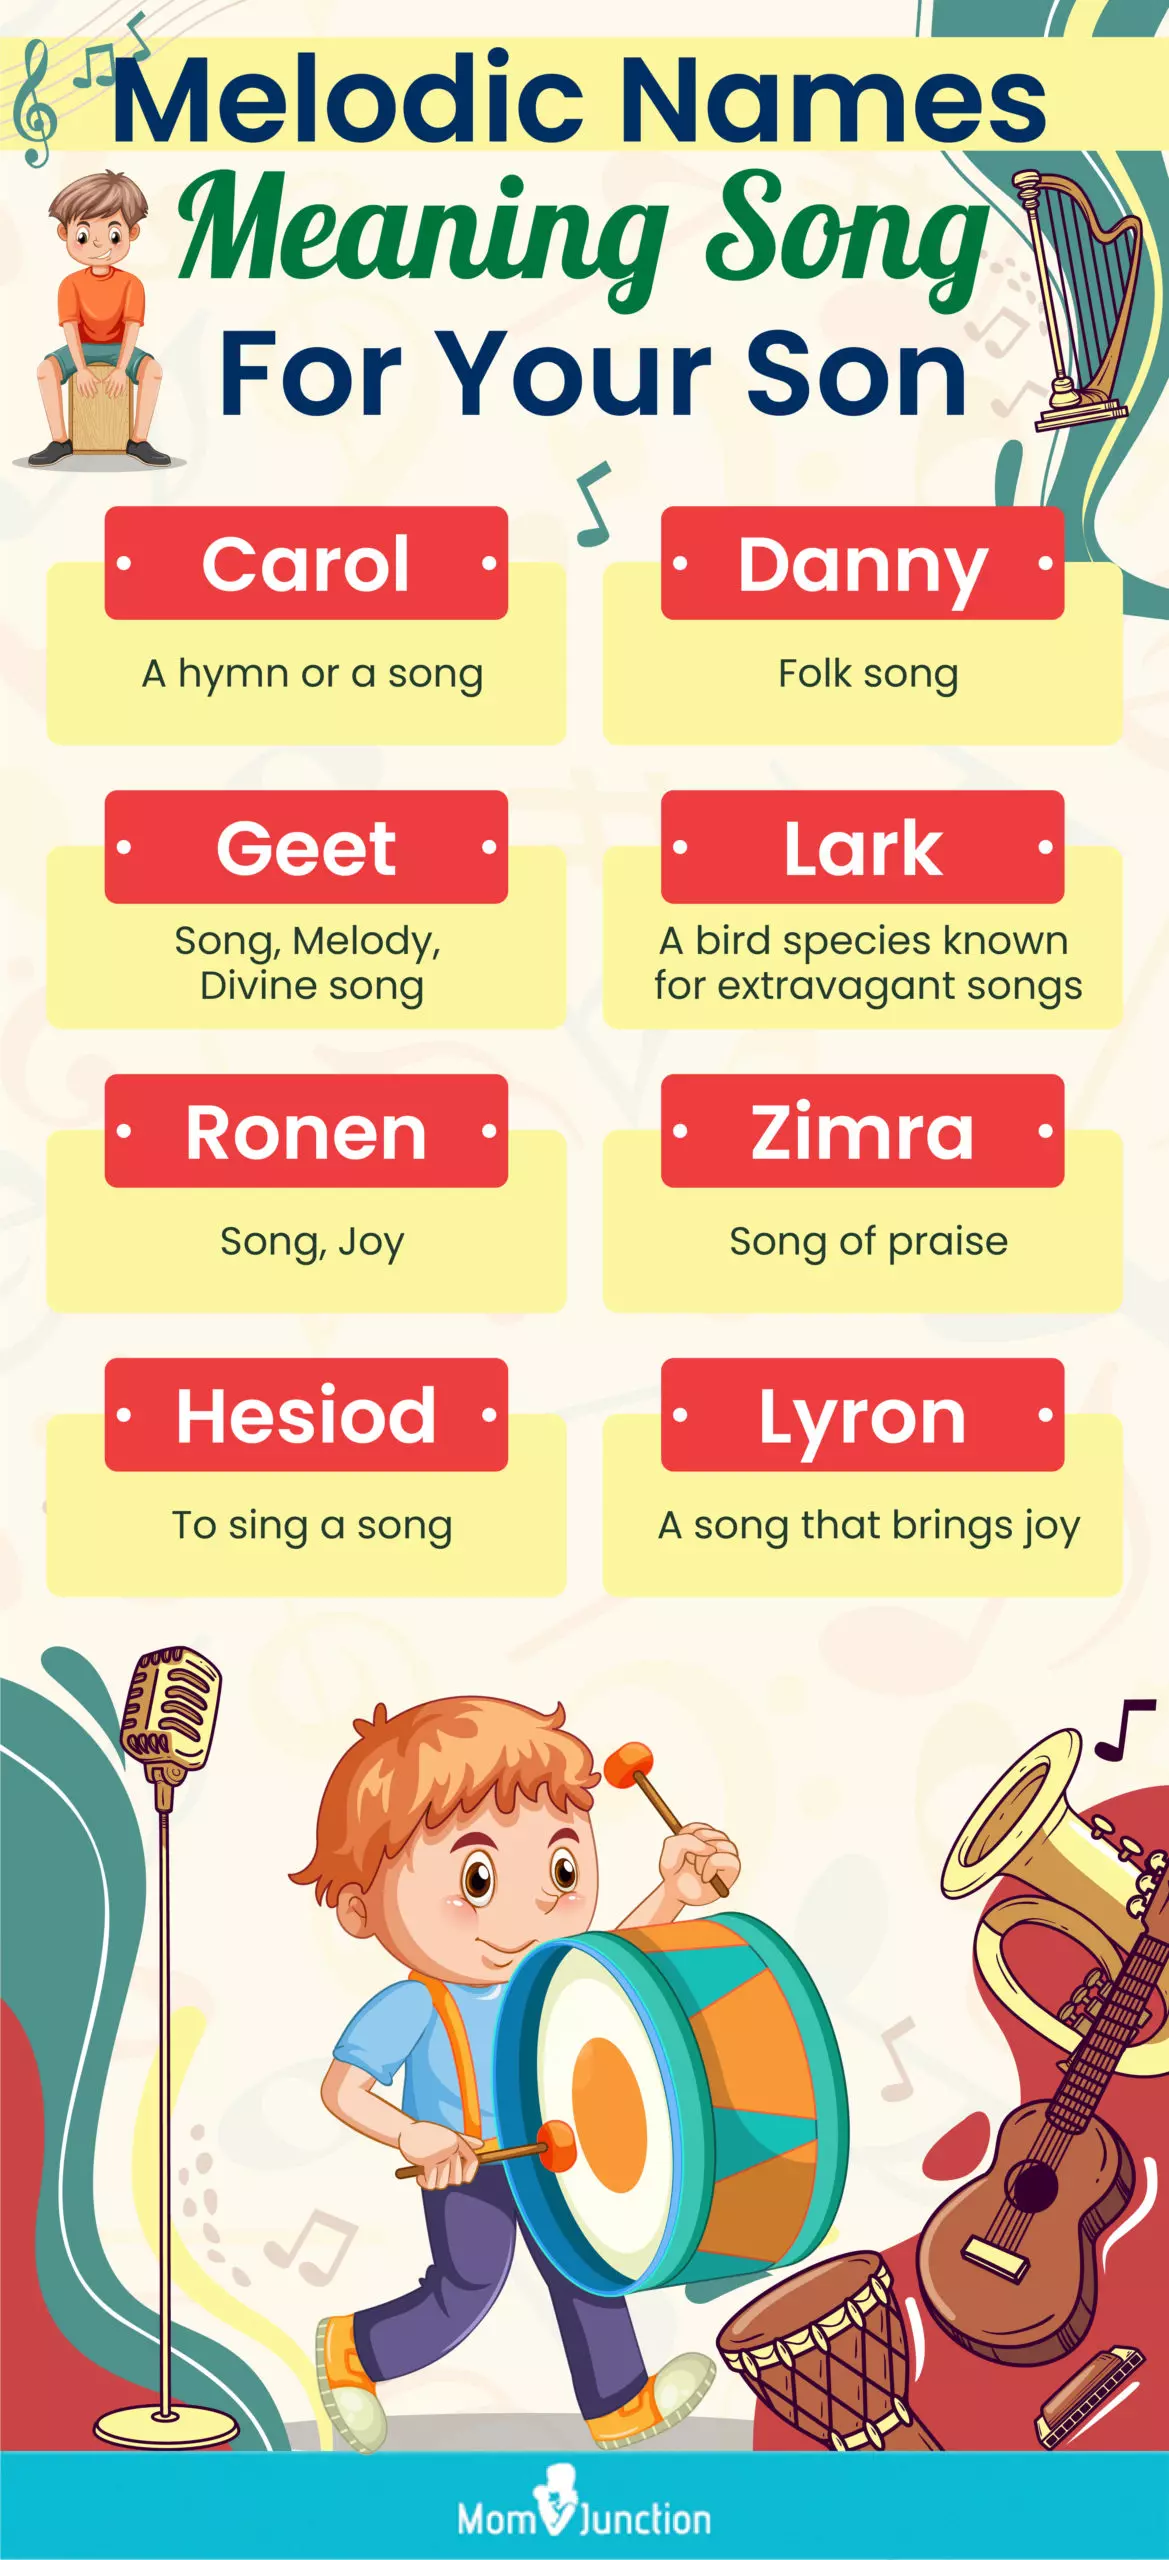 melodic names meaning song for your son (infographic)